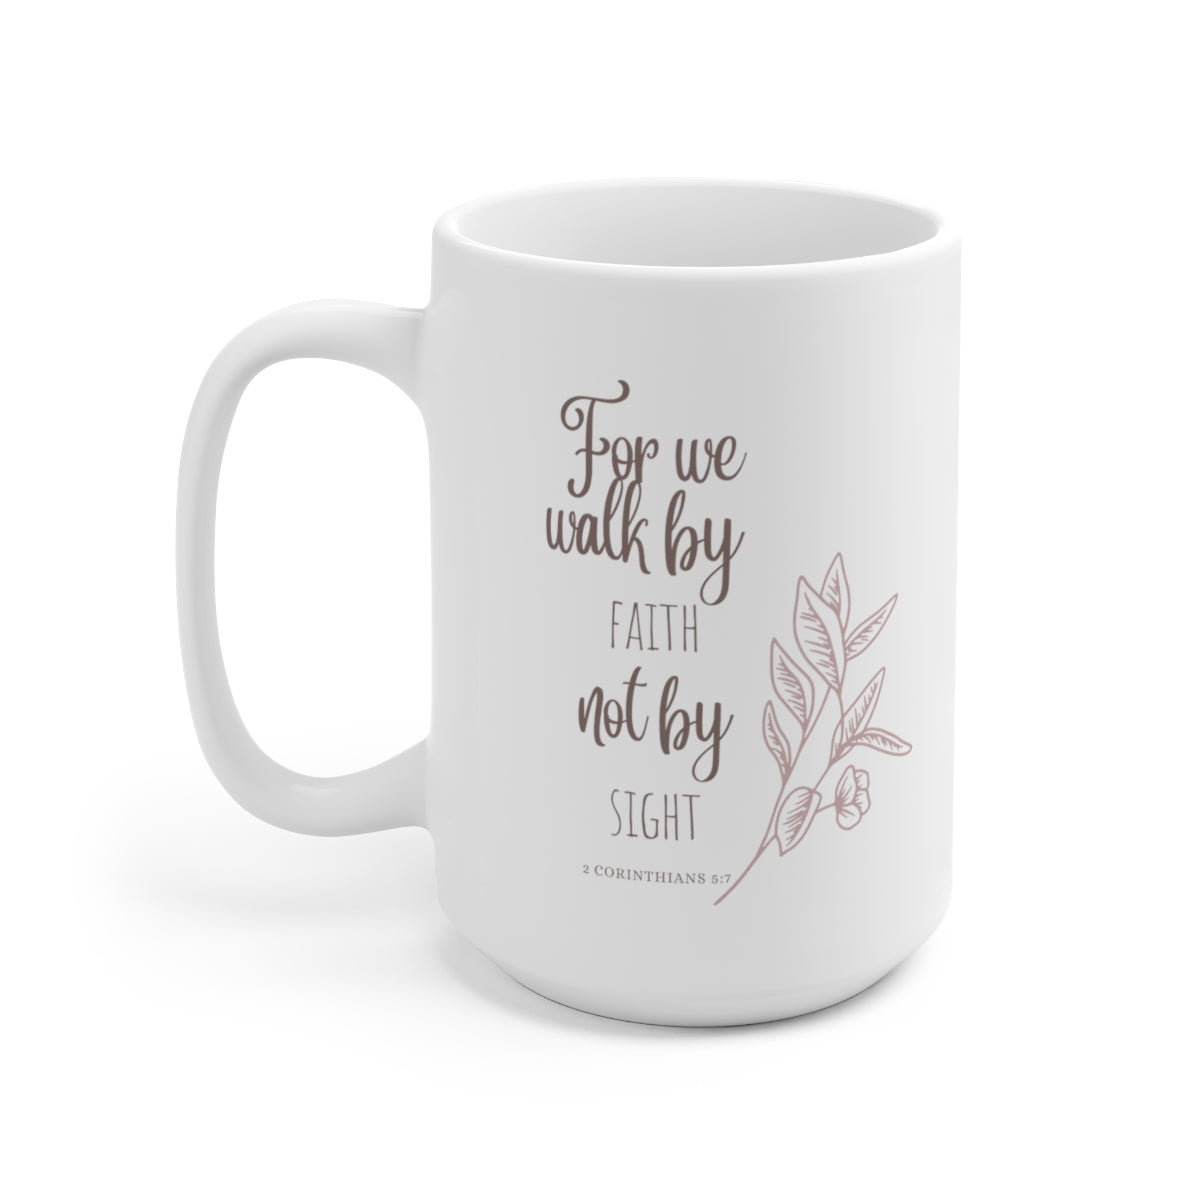 "Walk by Faith, not by Sight" 2 Corinthians 5:7 Ceramic Mug/Gifts for Her/Encouraging Gifts/Scripture Gifts